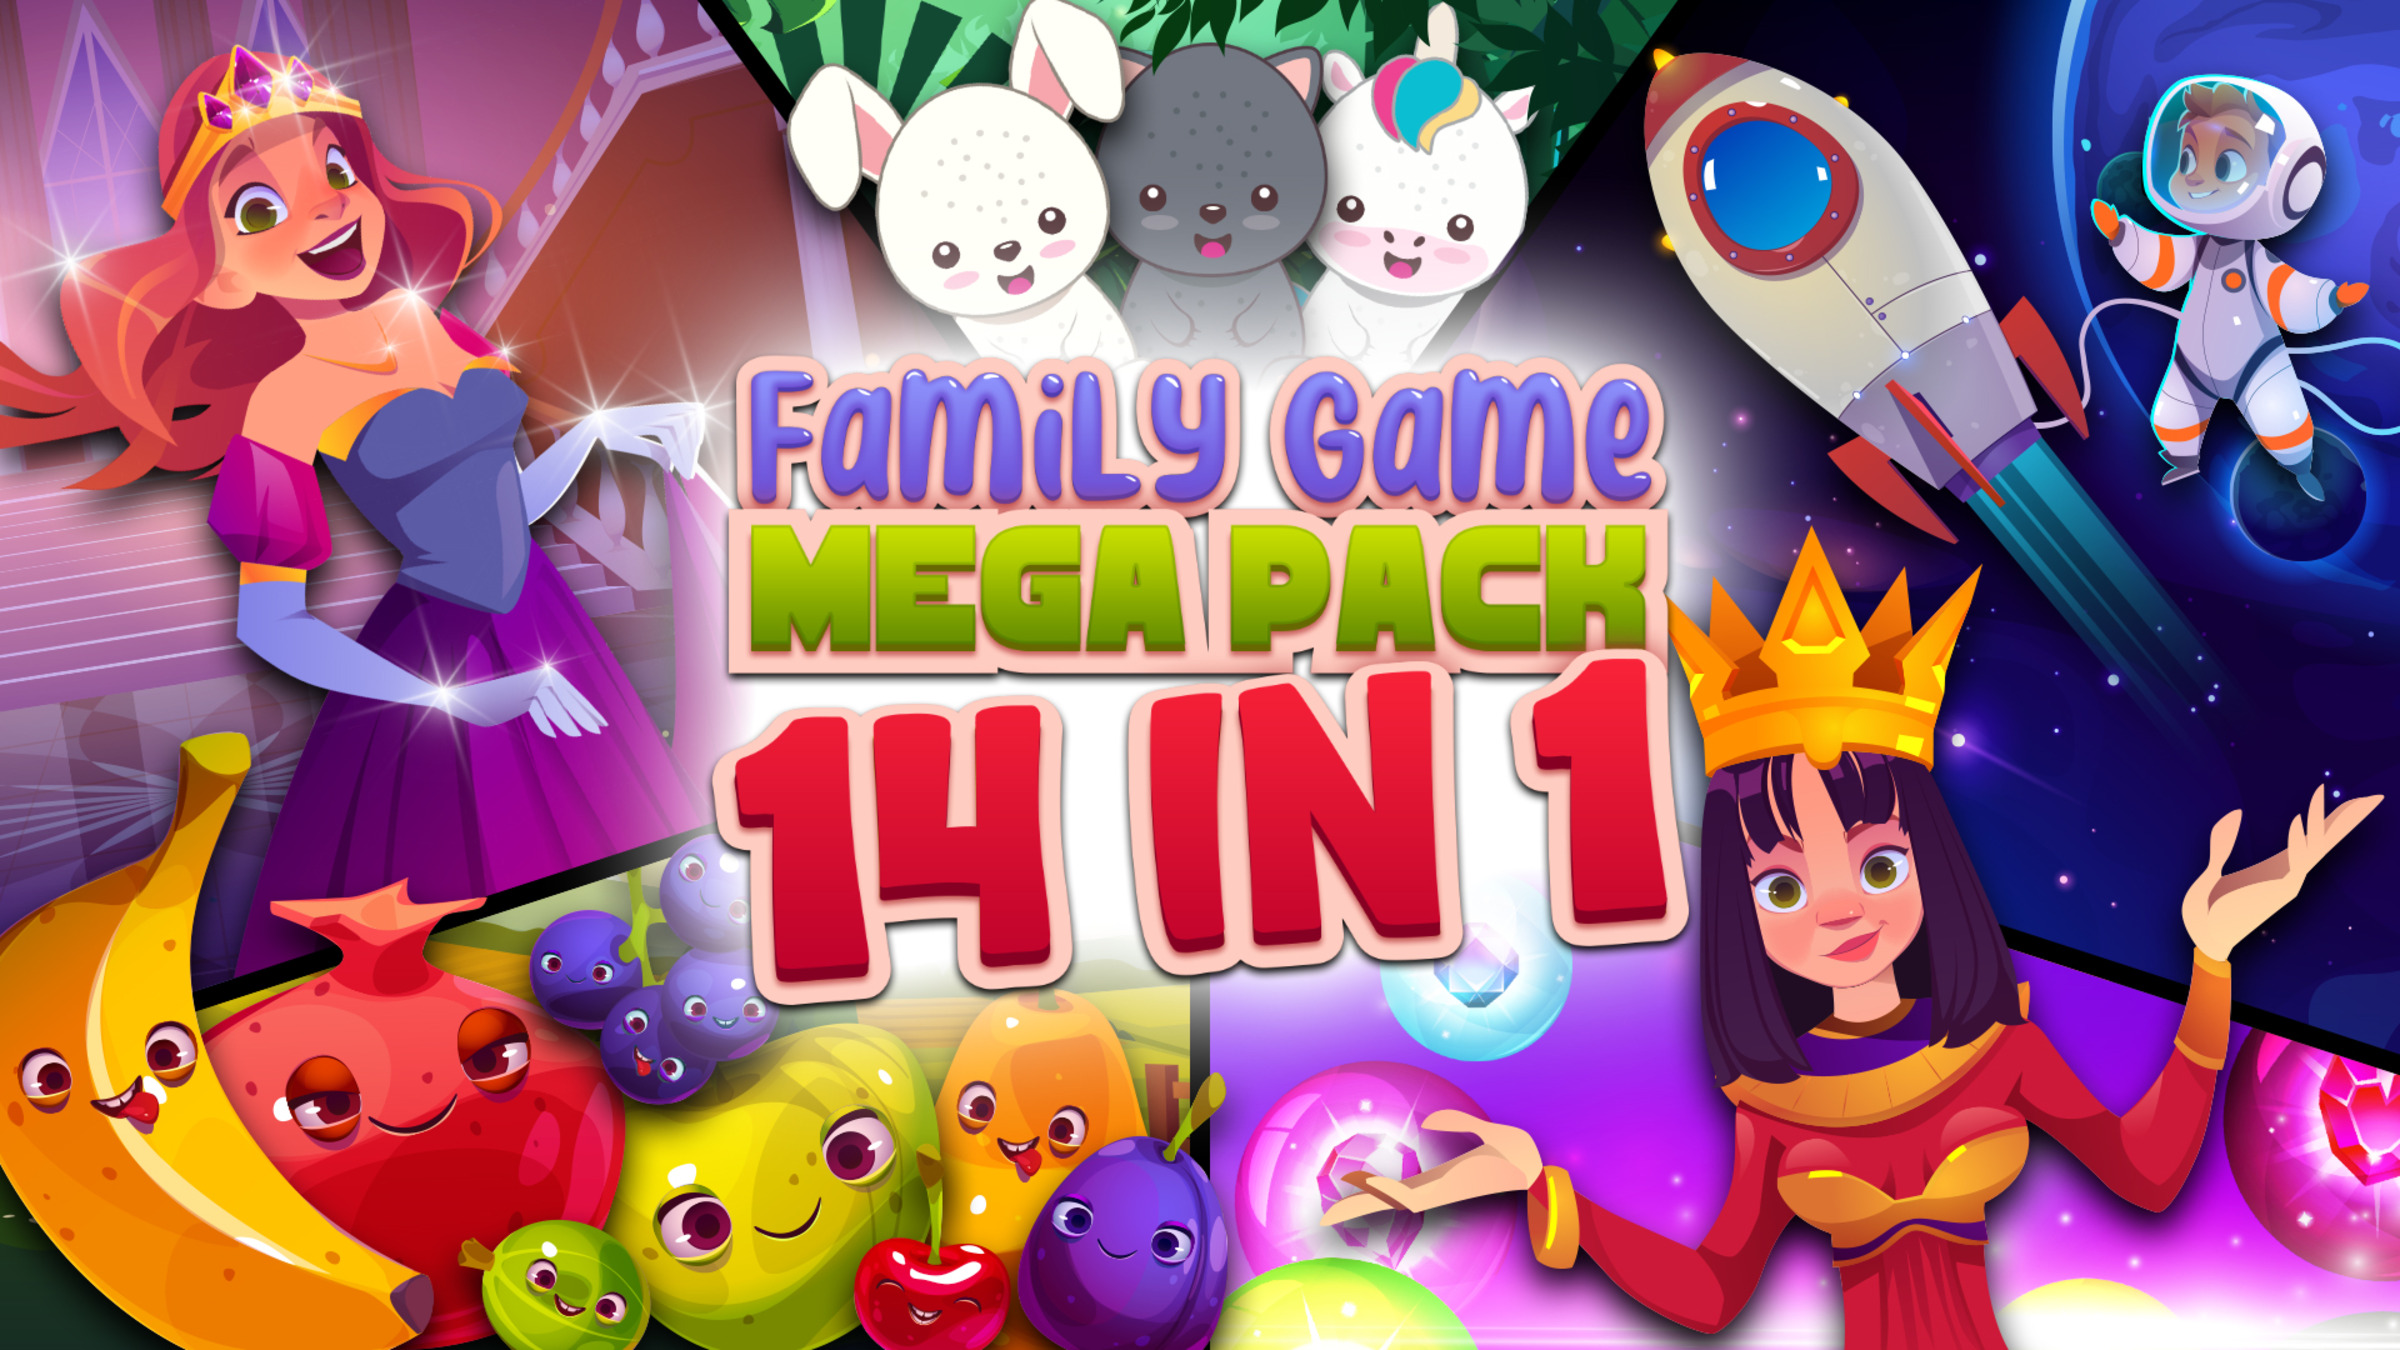 Family Game Mega Pack 14 in 1 for Nintendo Switch - Nintendo Official Site